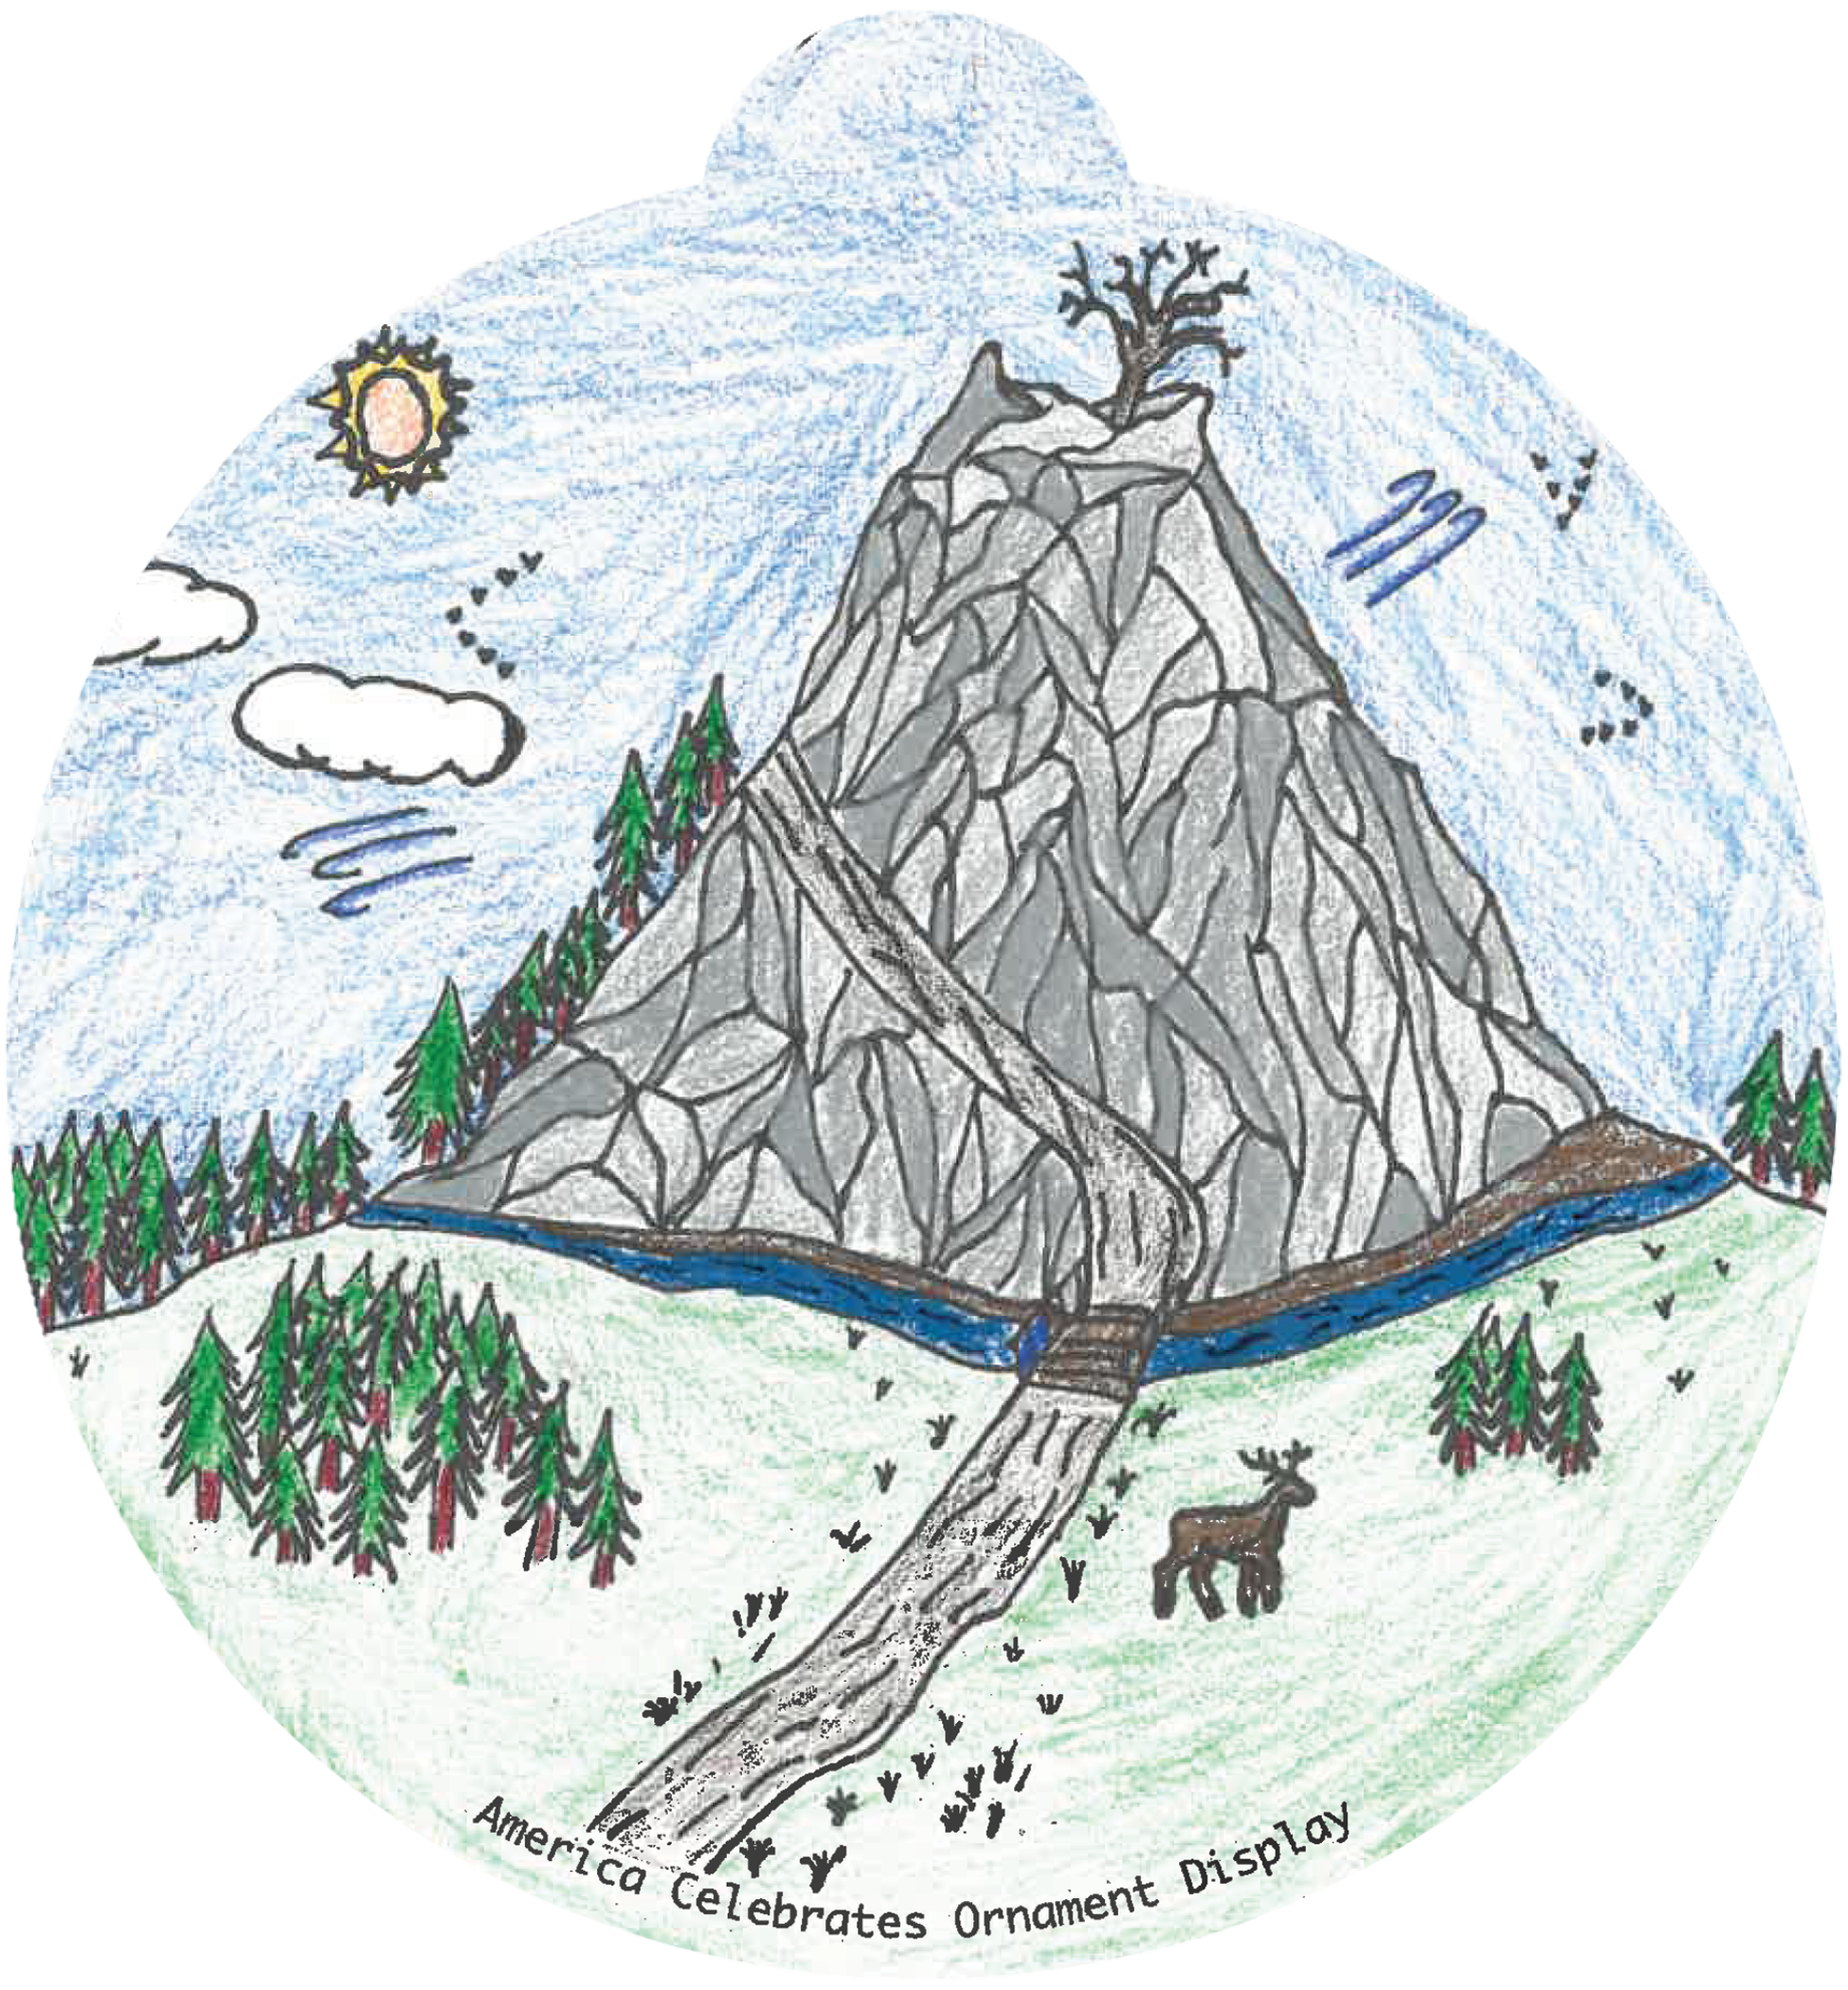 ornament depicting a trail leading up to a large stone mountain